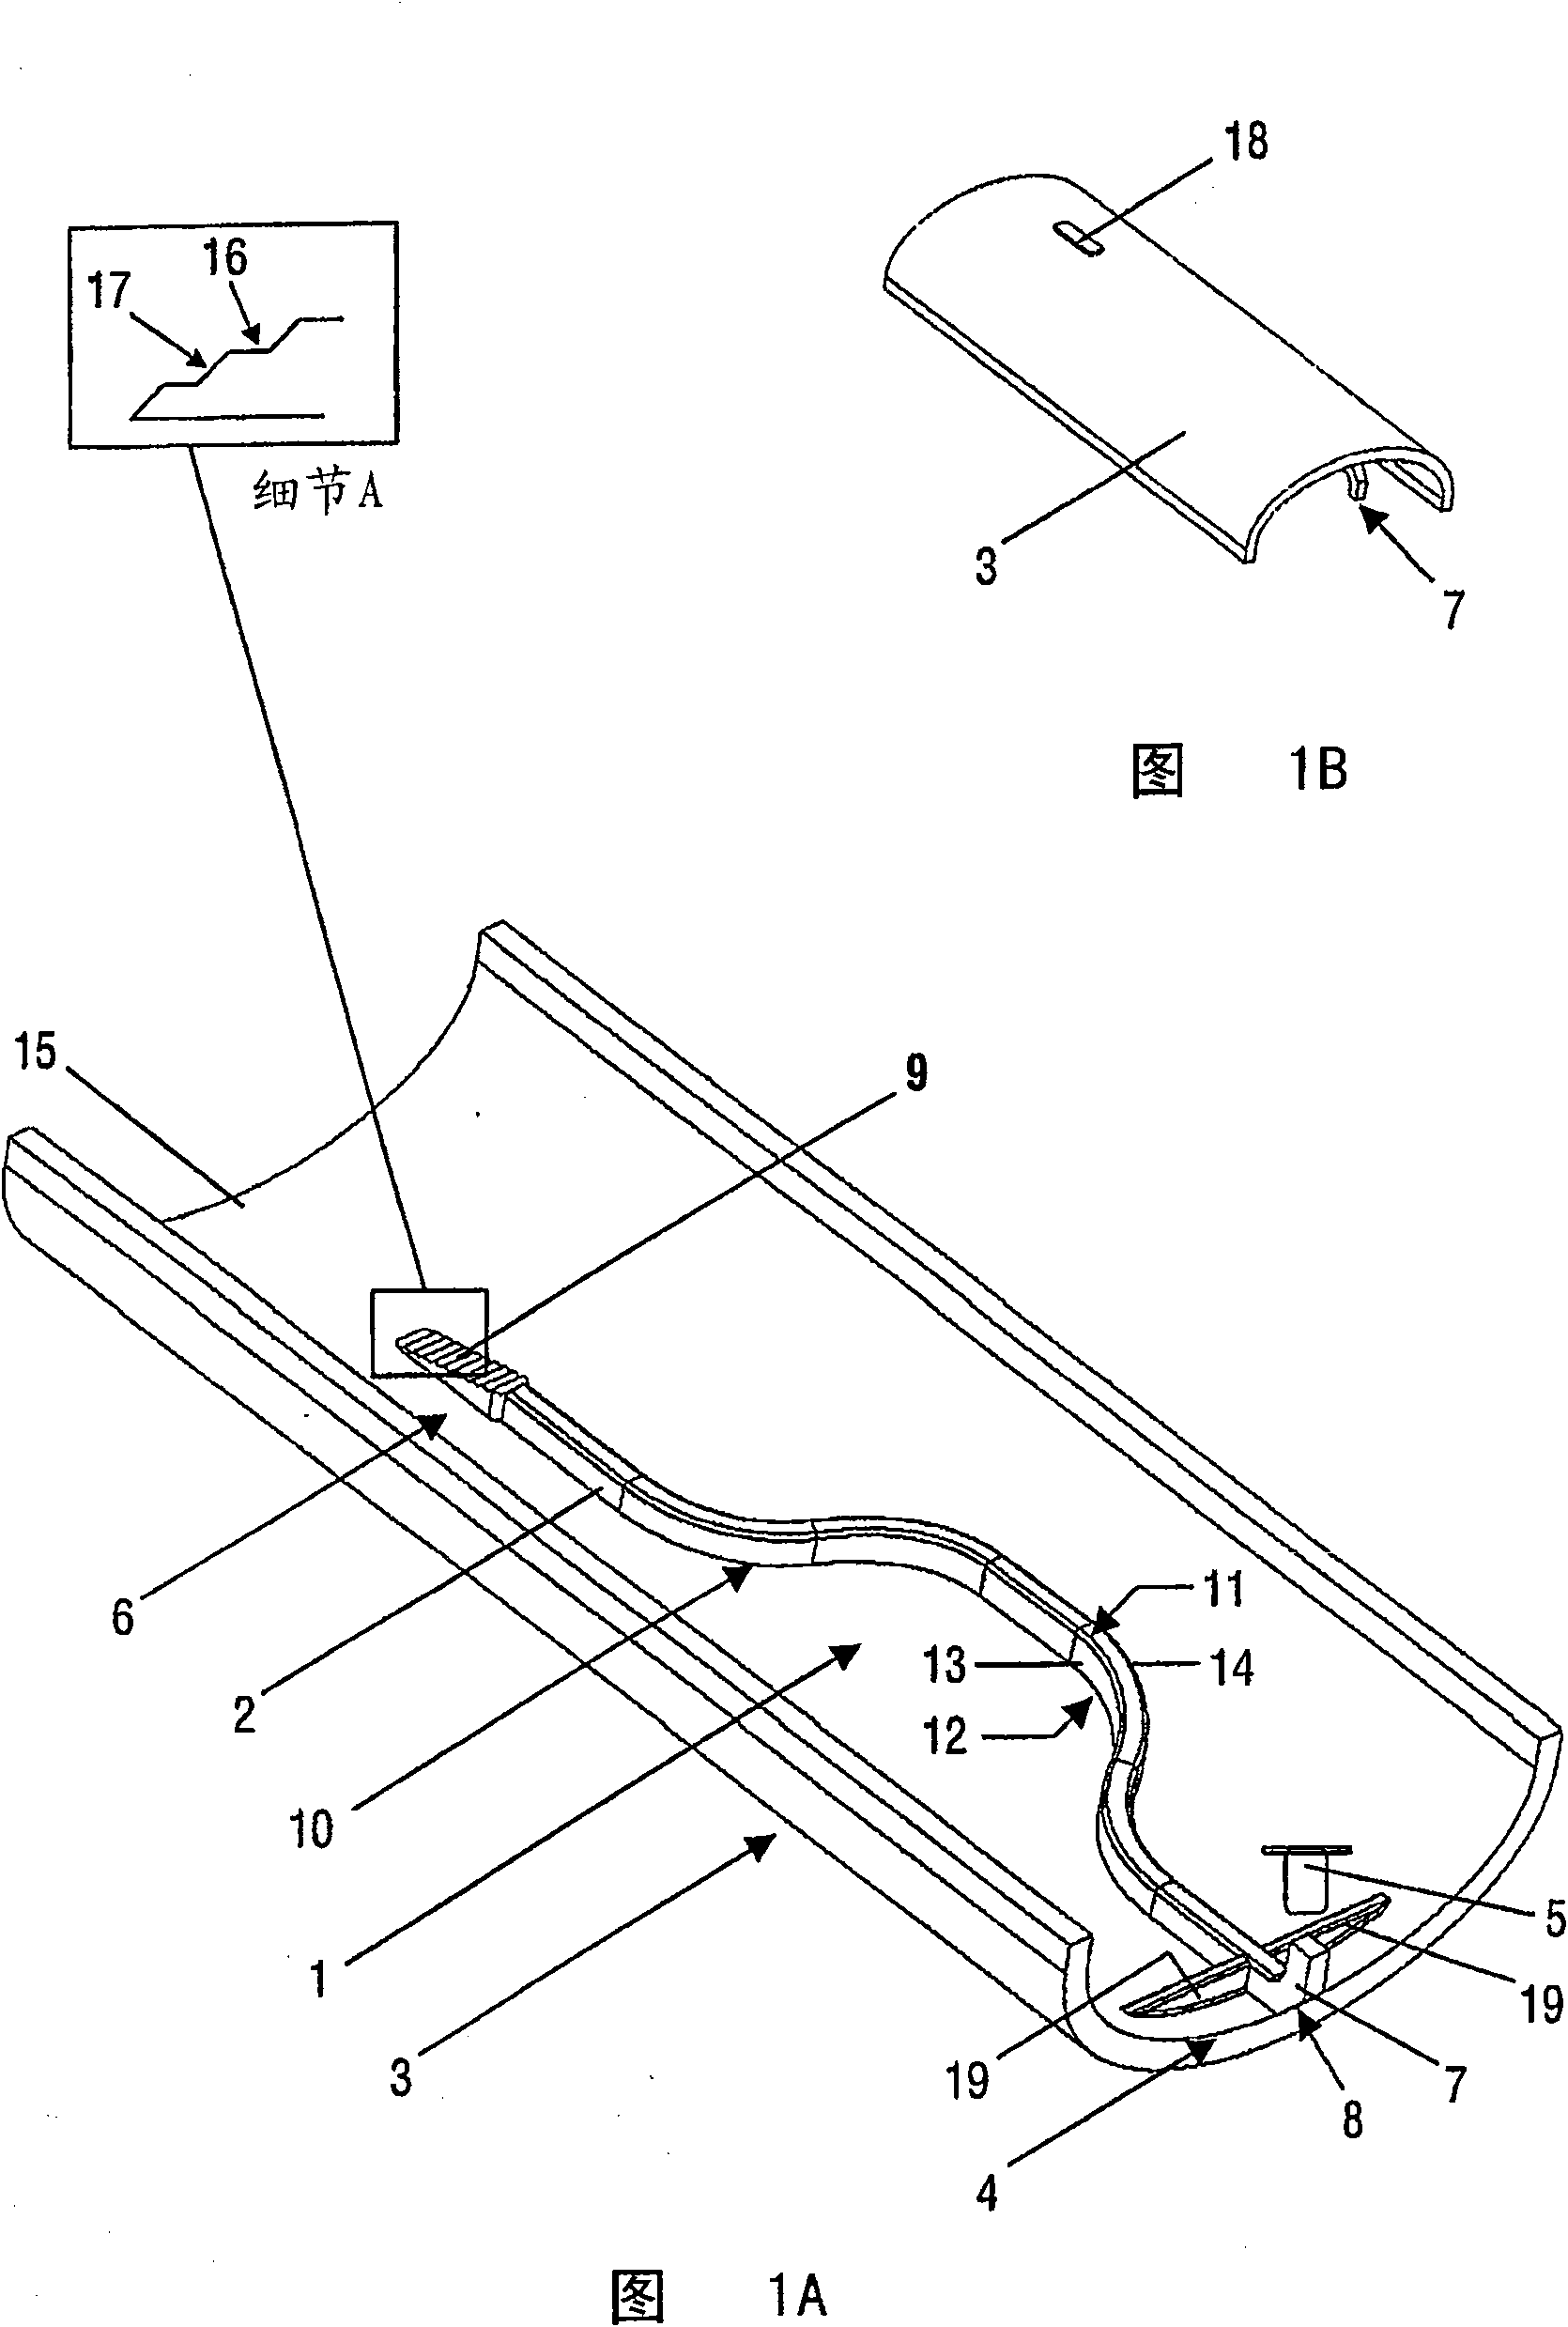 Method for integrating a light guide in or onto a support structure